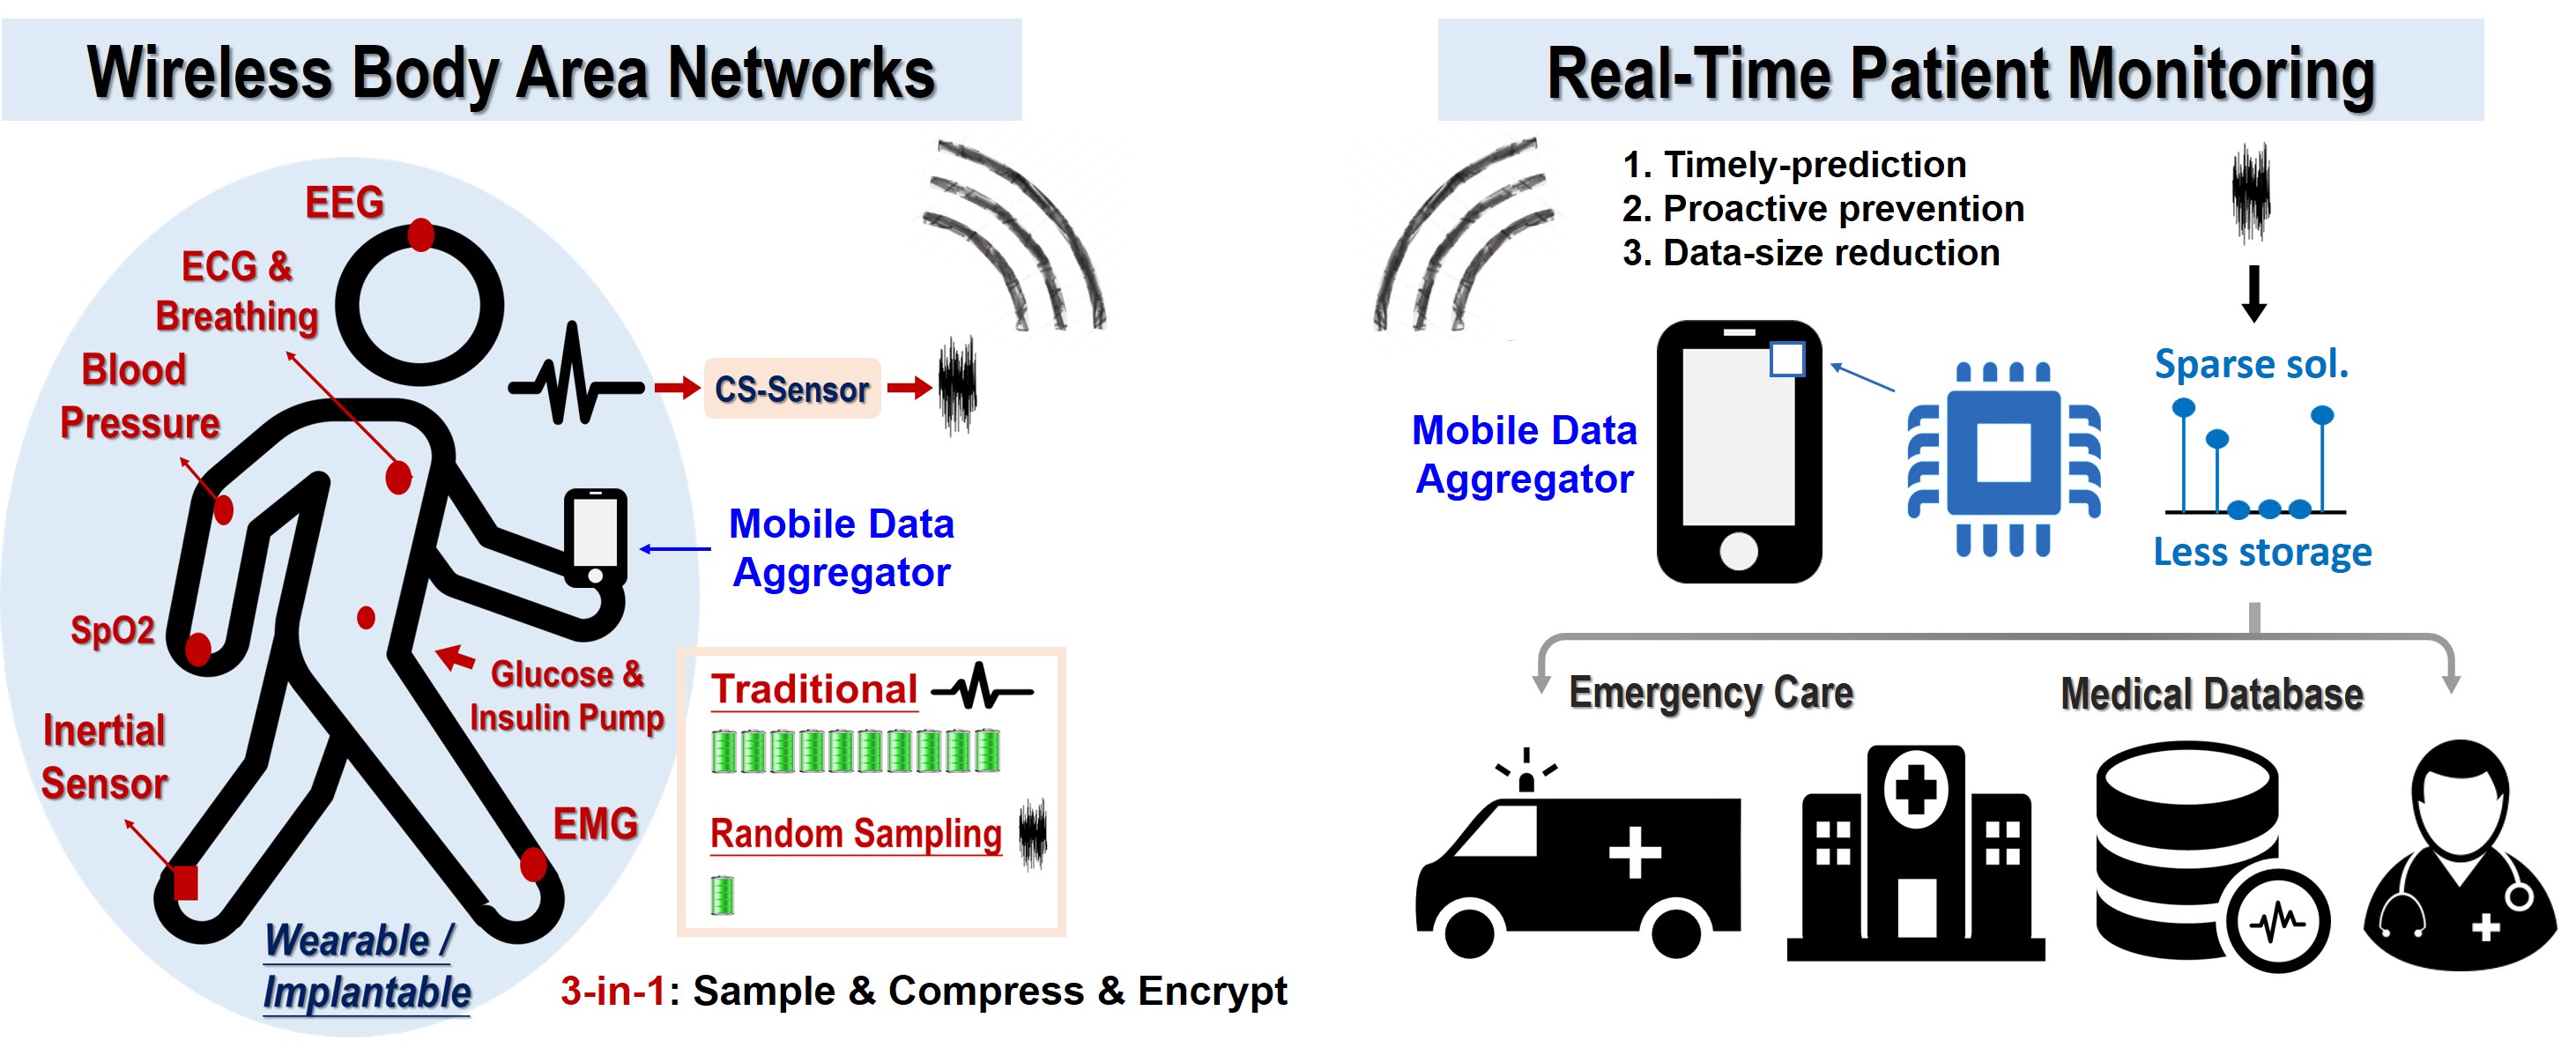 Compressive Sensing (CS) TechnologiesCircuit Implementations for Wireless Healthcare SystemFuture 5G Mobile Communication Systems